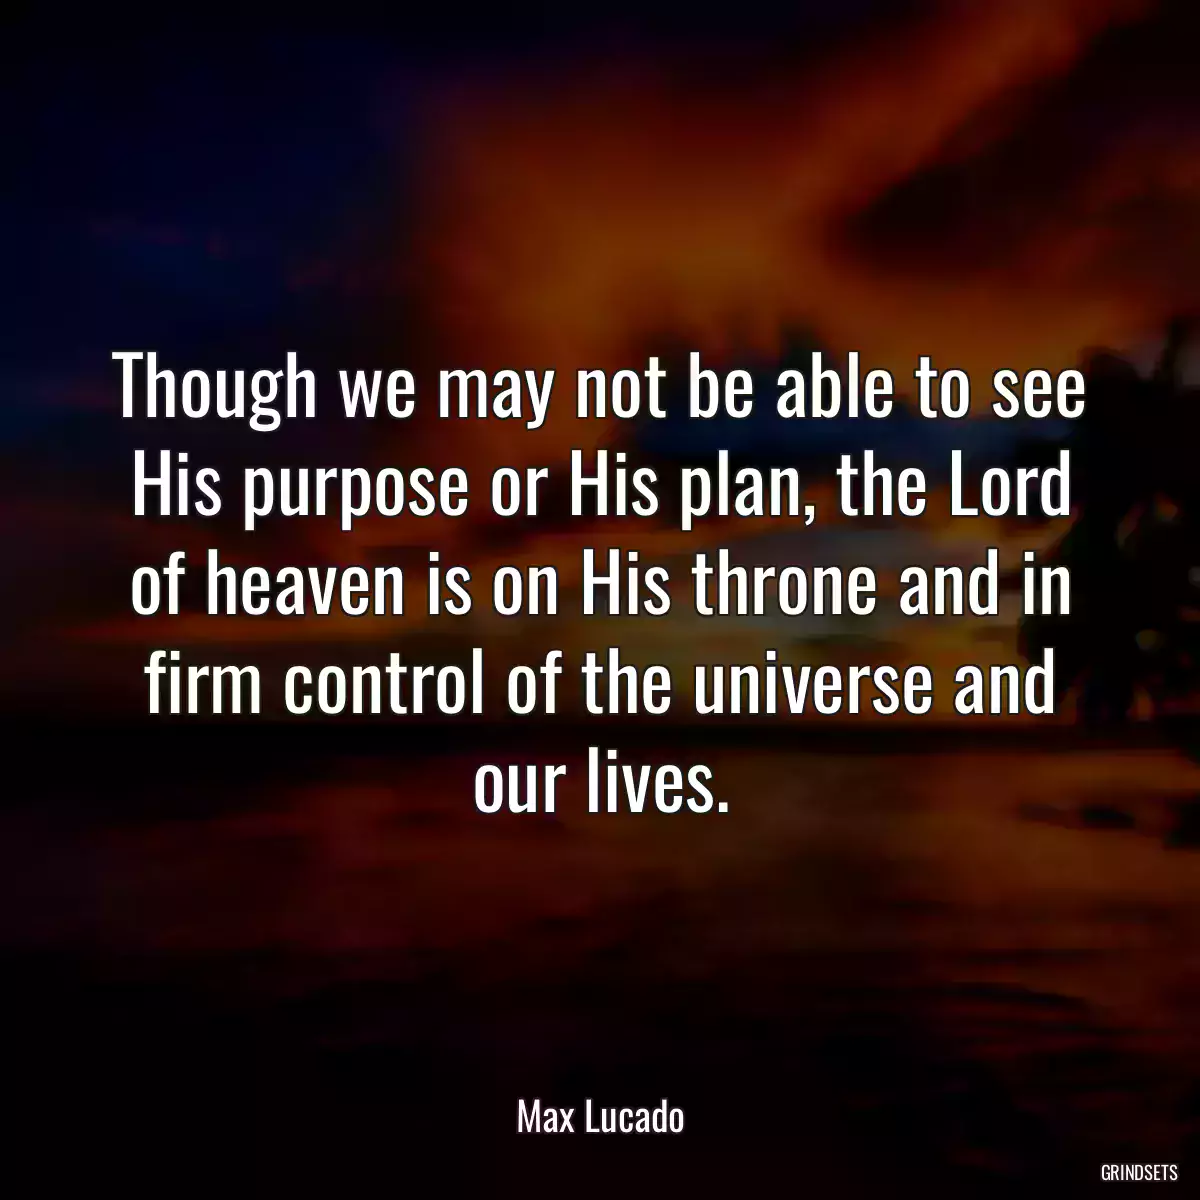 Though we may not be able to see His purpose or His plan, the Lord of heaven is on His throne and in firm control of the universe and our lives.